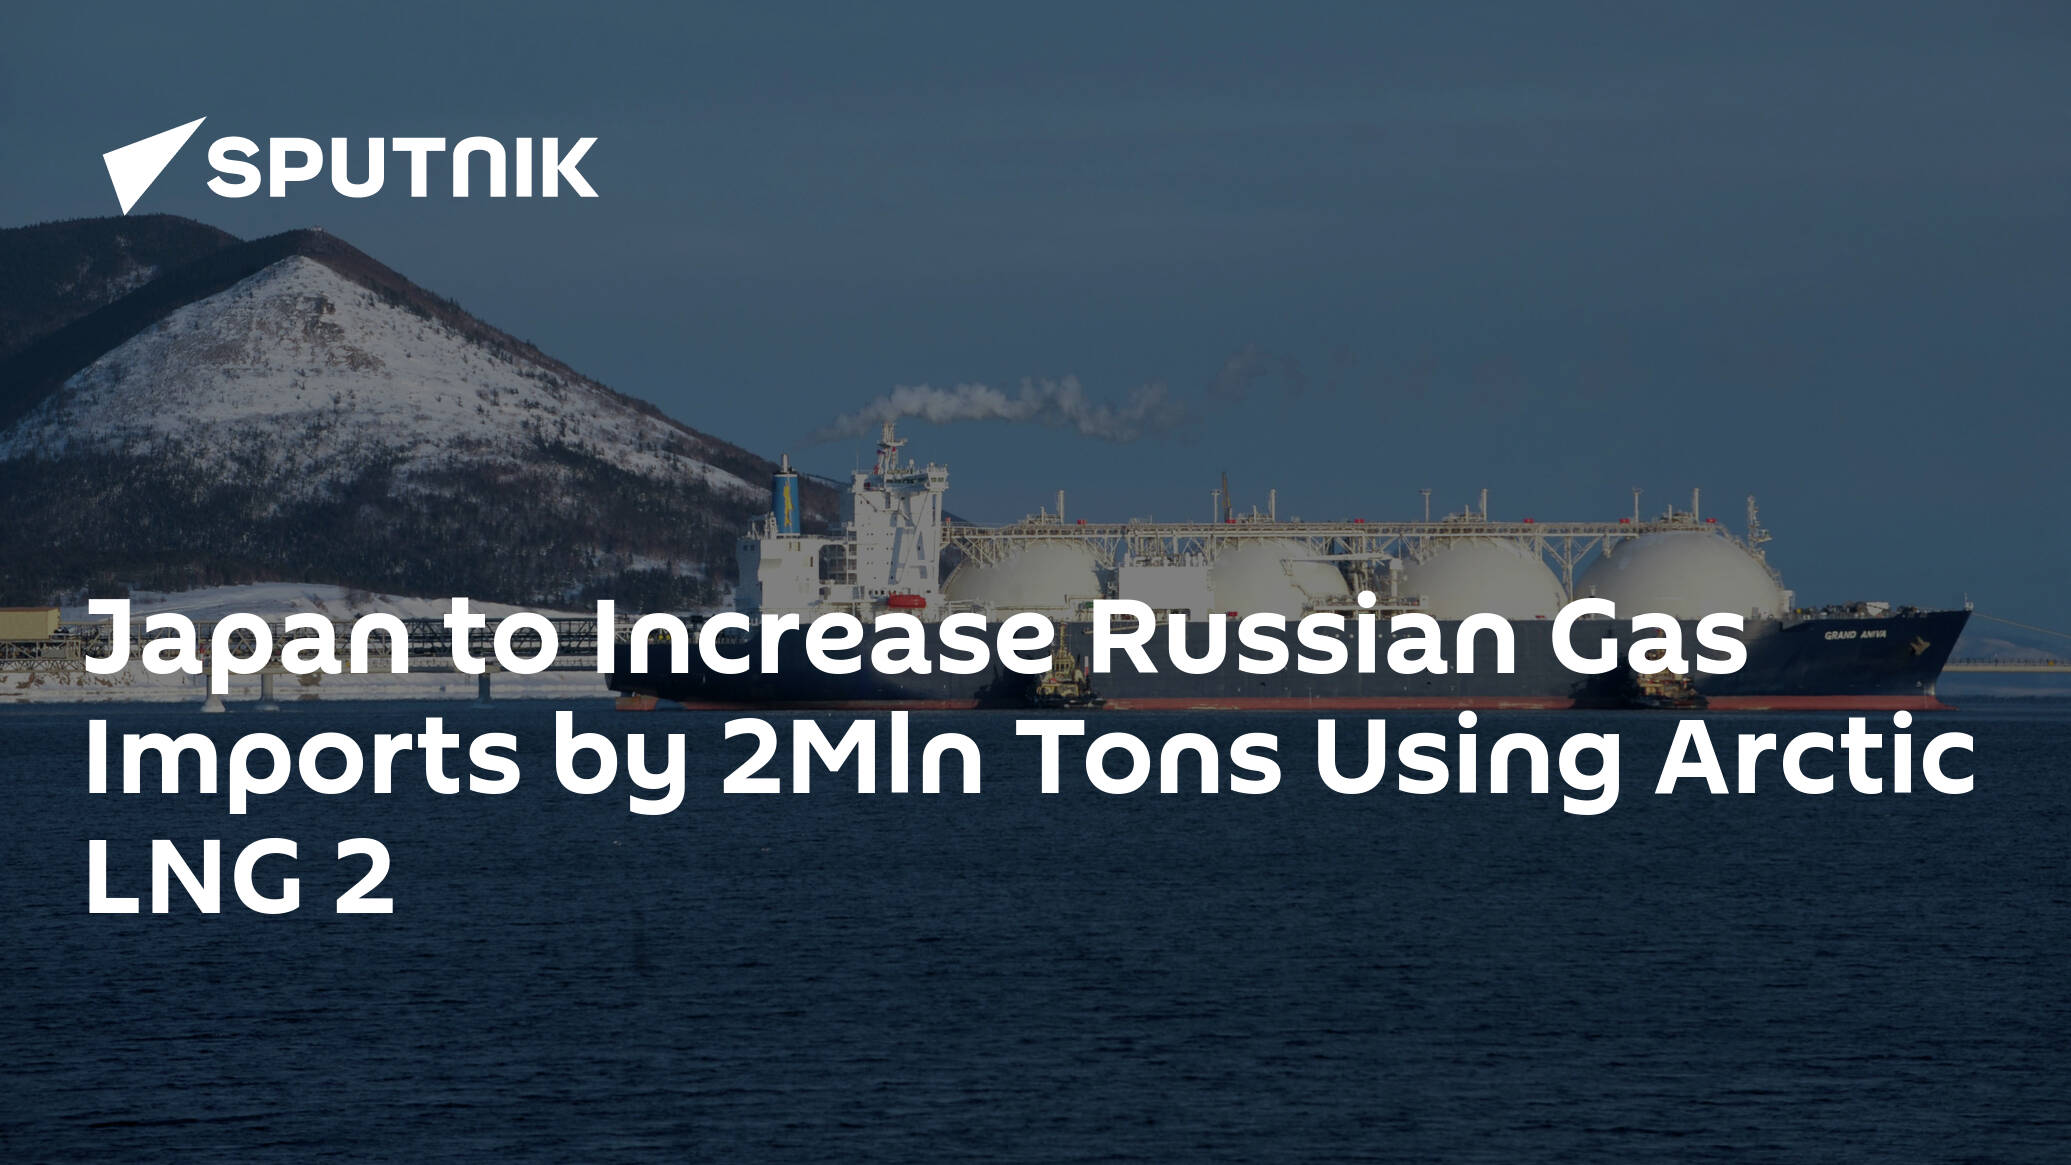 Japan to Increase Russian Gas Imports by 2Mln Tonnes Using Arctic LNG 2